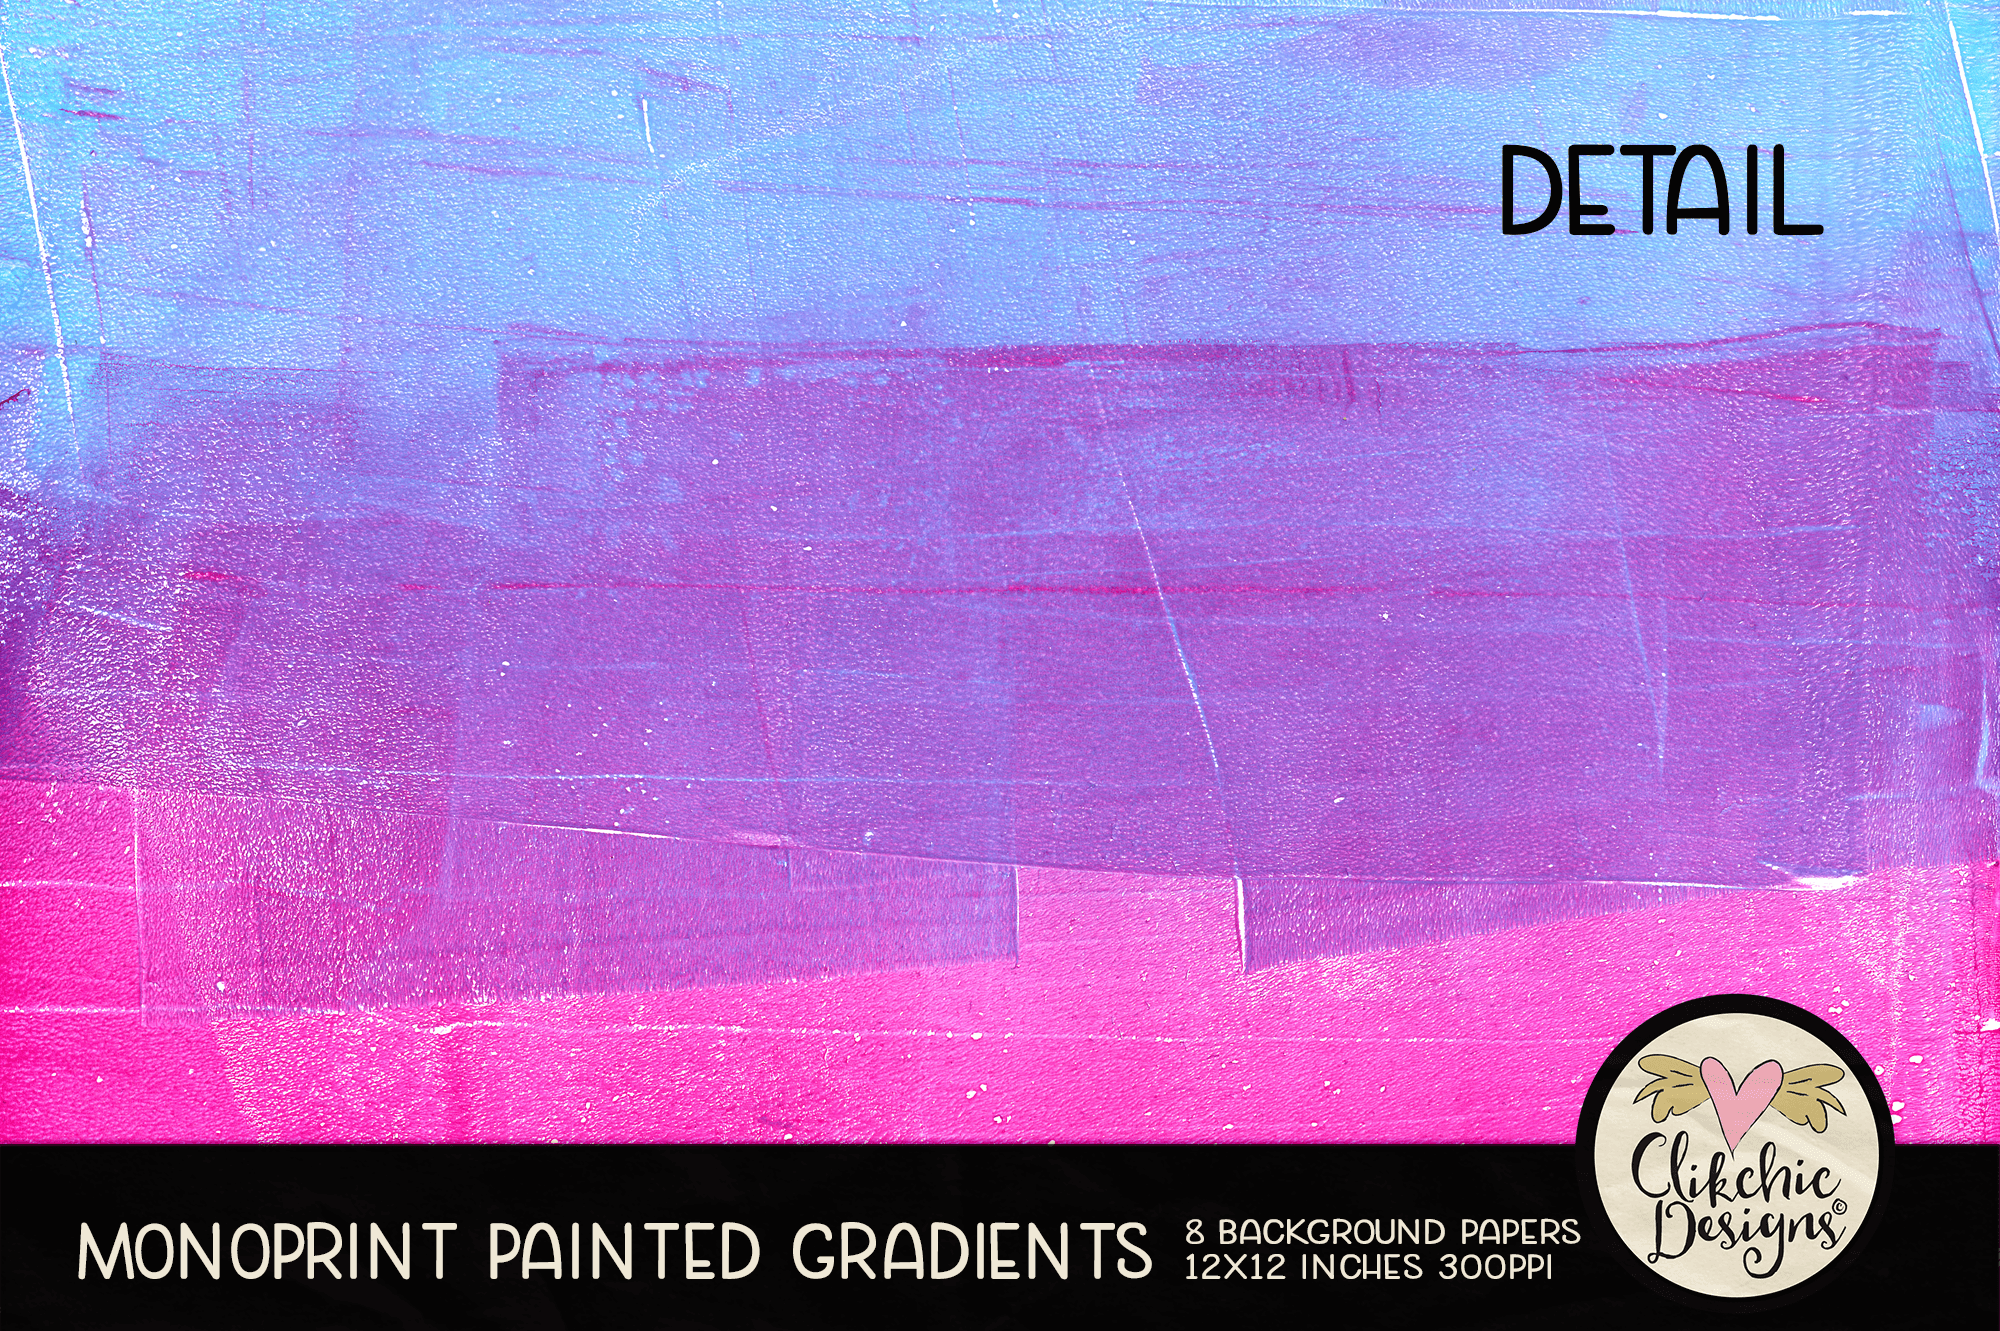 Monoprint Grunge Painted Gradients Background Papers by Clikchic Designs